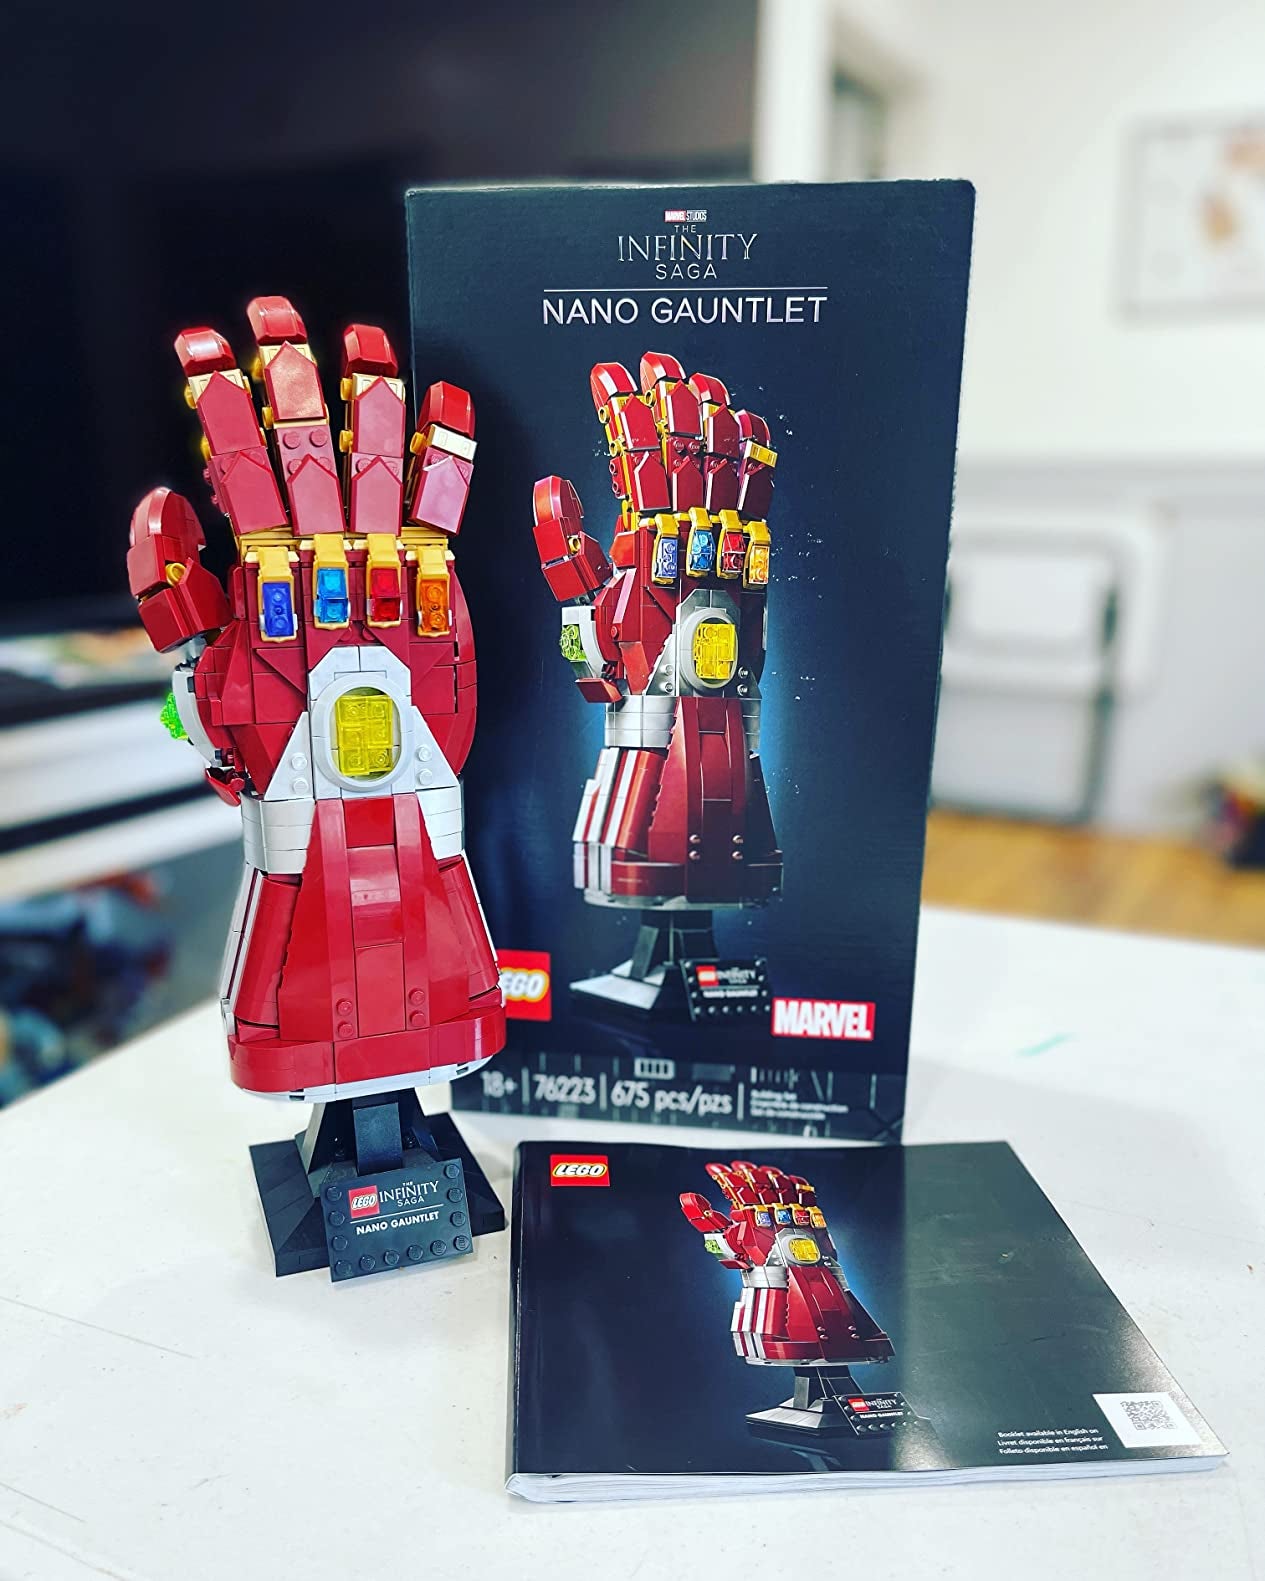 reviewer image of a built Lego gauntlet next to the box it came in